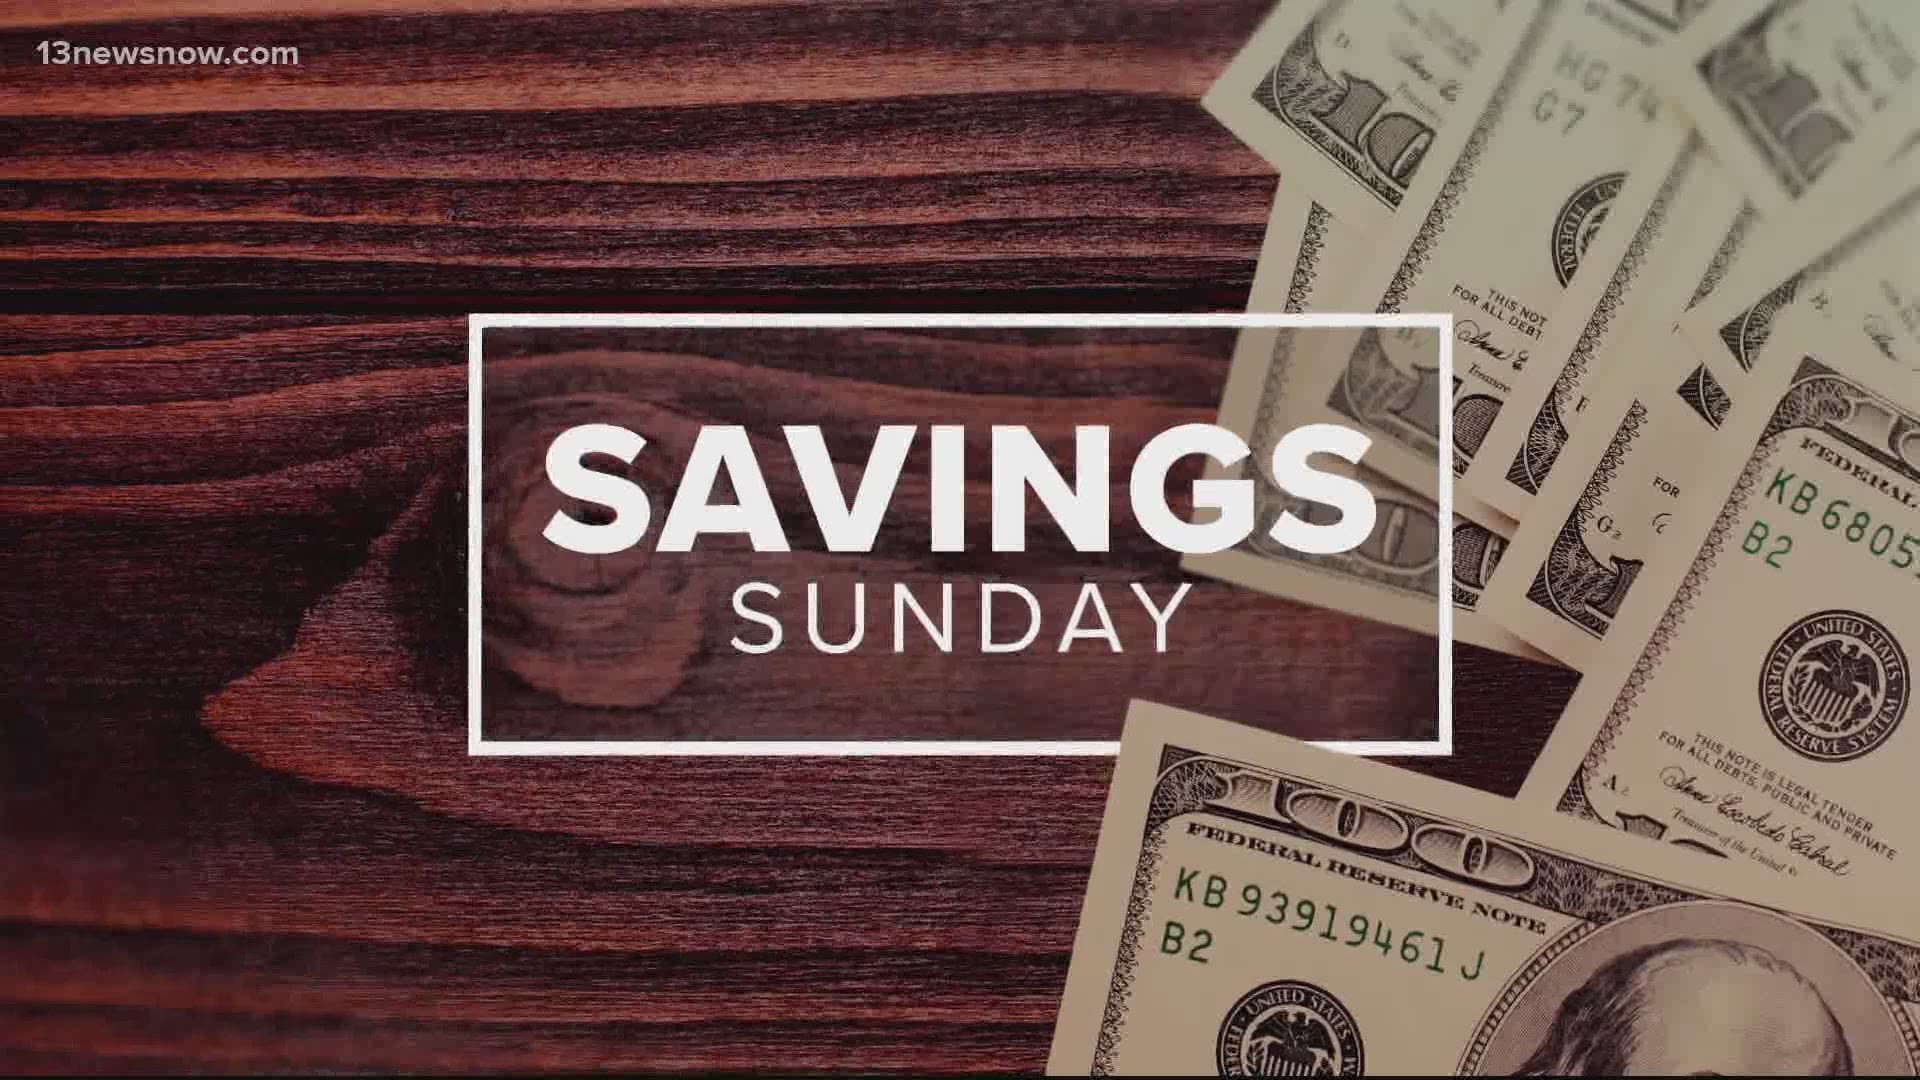 Savings Sunday: Deals for the week of July 19, 2020. A Frugal Chick (https://www.afrugalchick.com) brings you this week's deals.